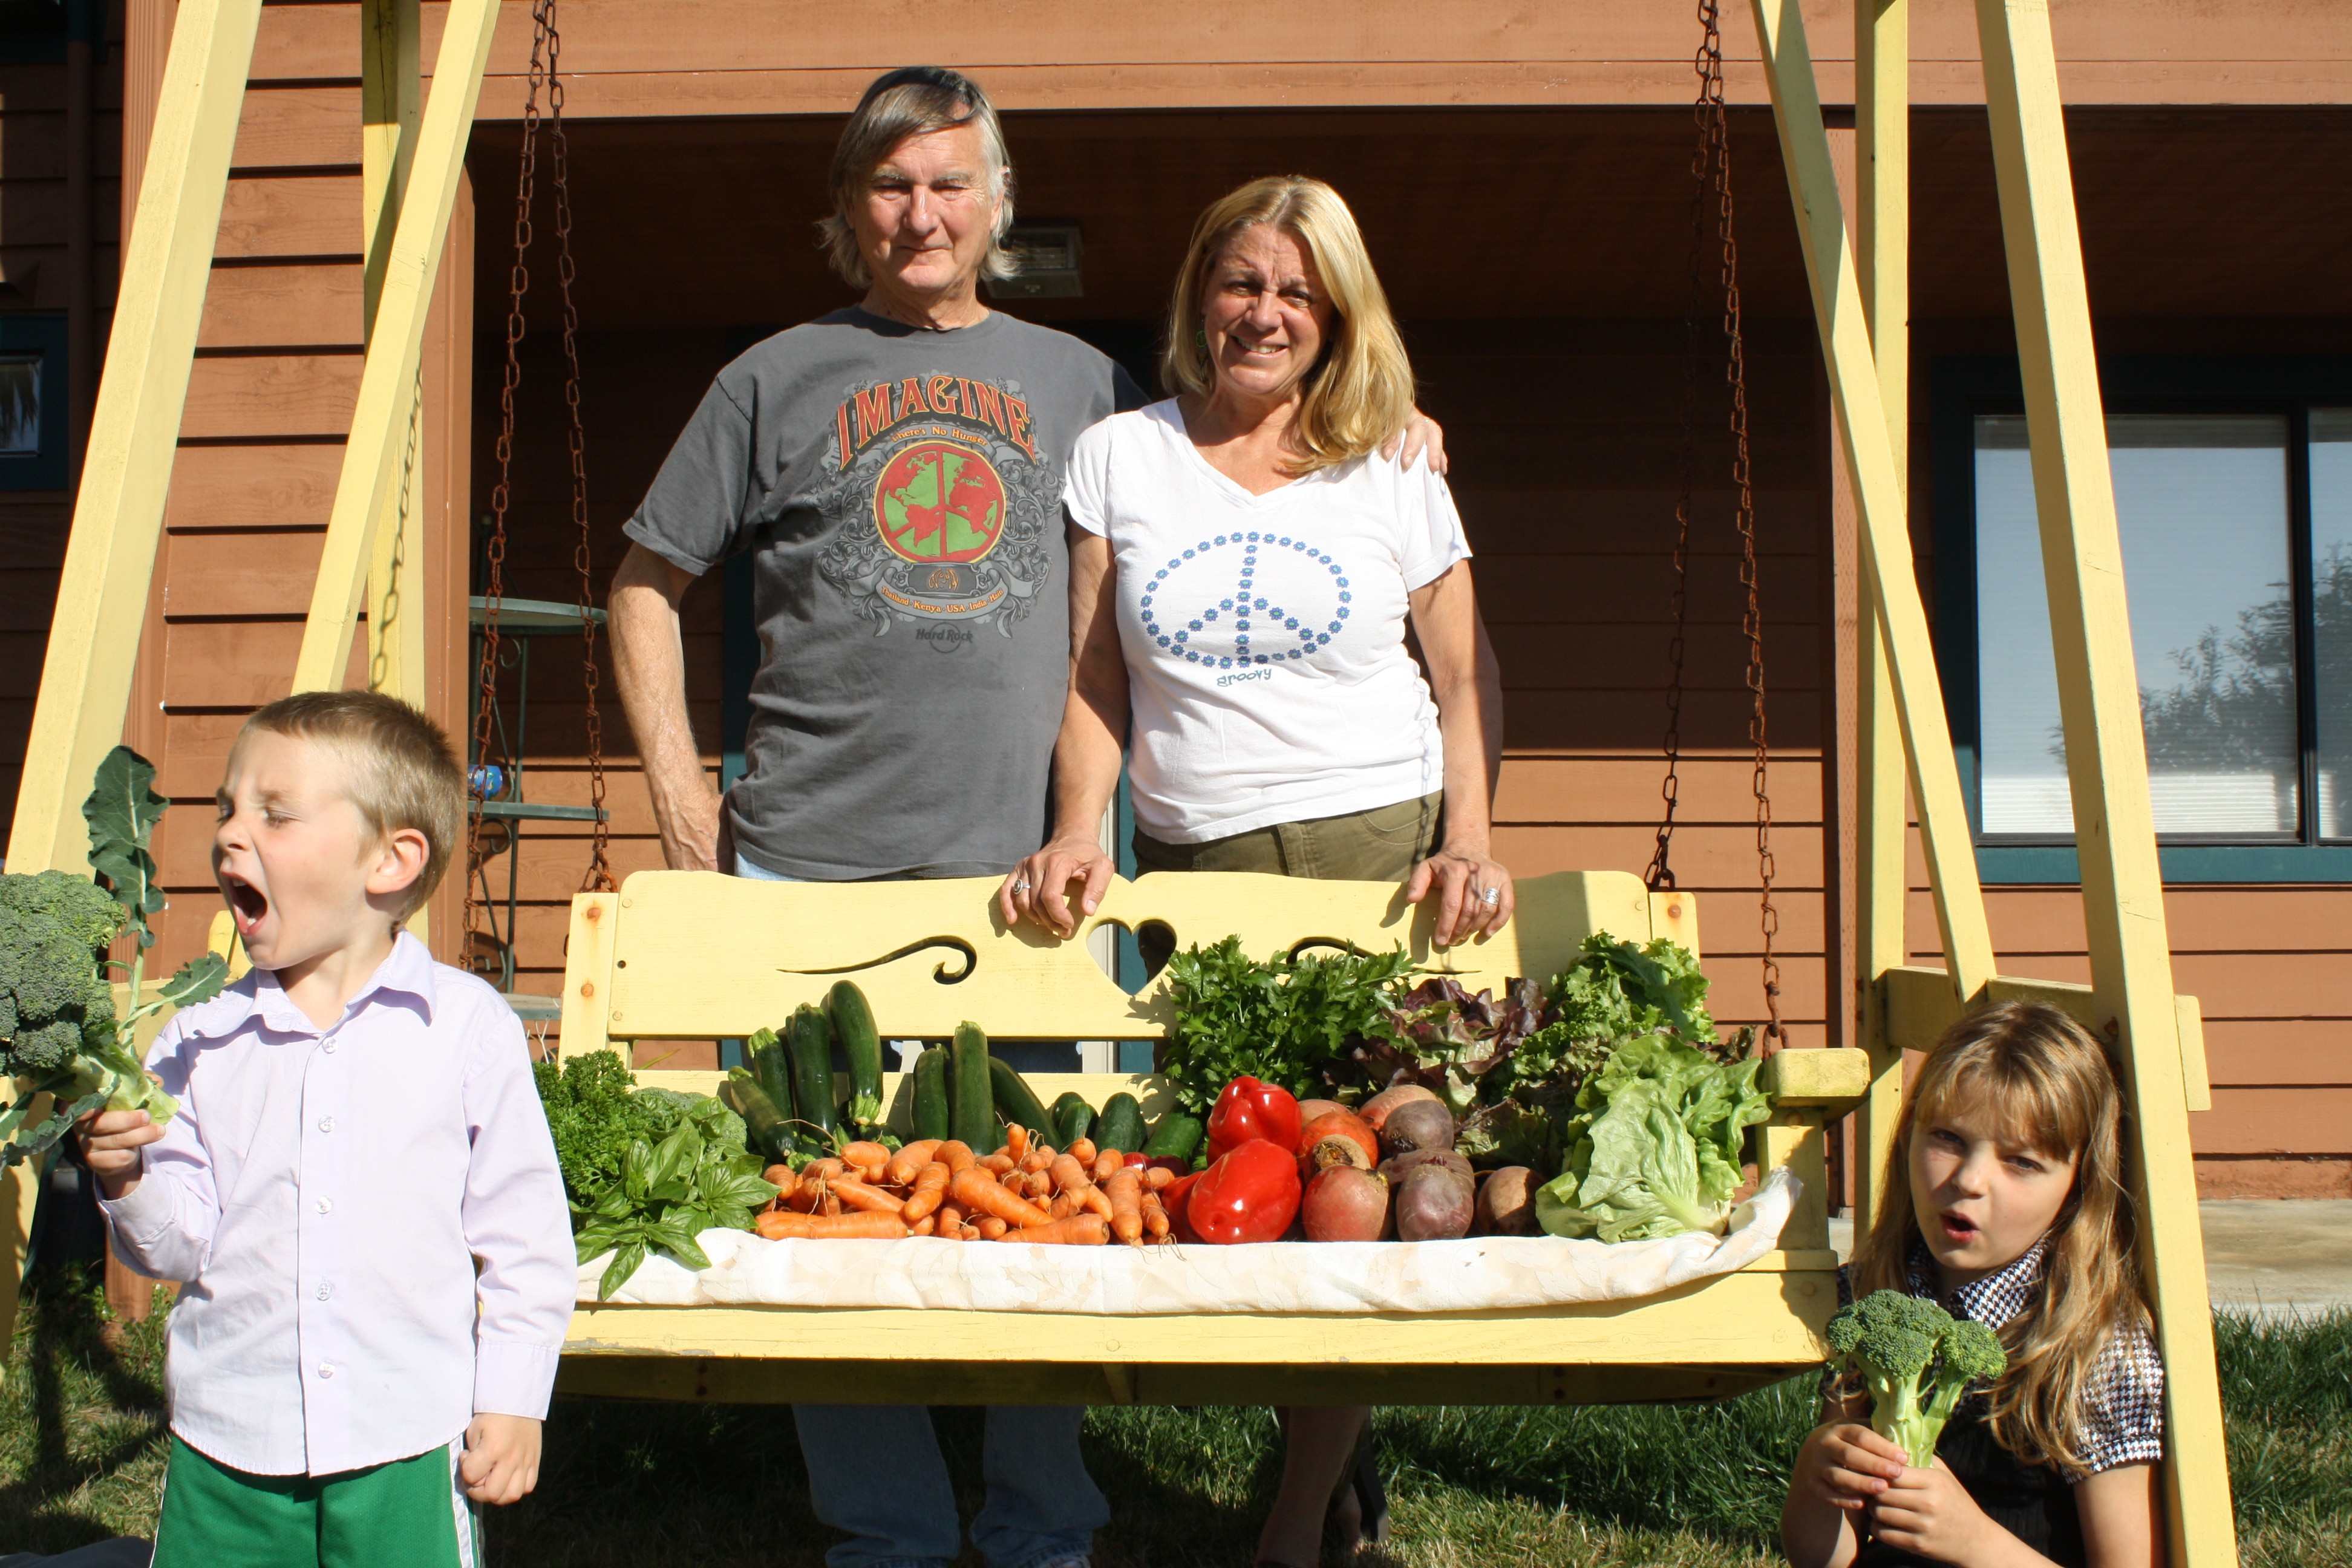 Chuck and Sherry Vanderpool with a load of vegetables from DeepSeeded Community Farm - COURTESY OF HUMBOLDT HOMEMADE MEALS